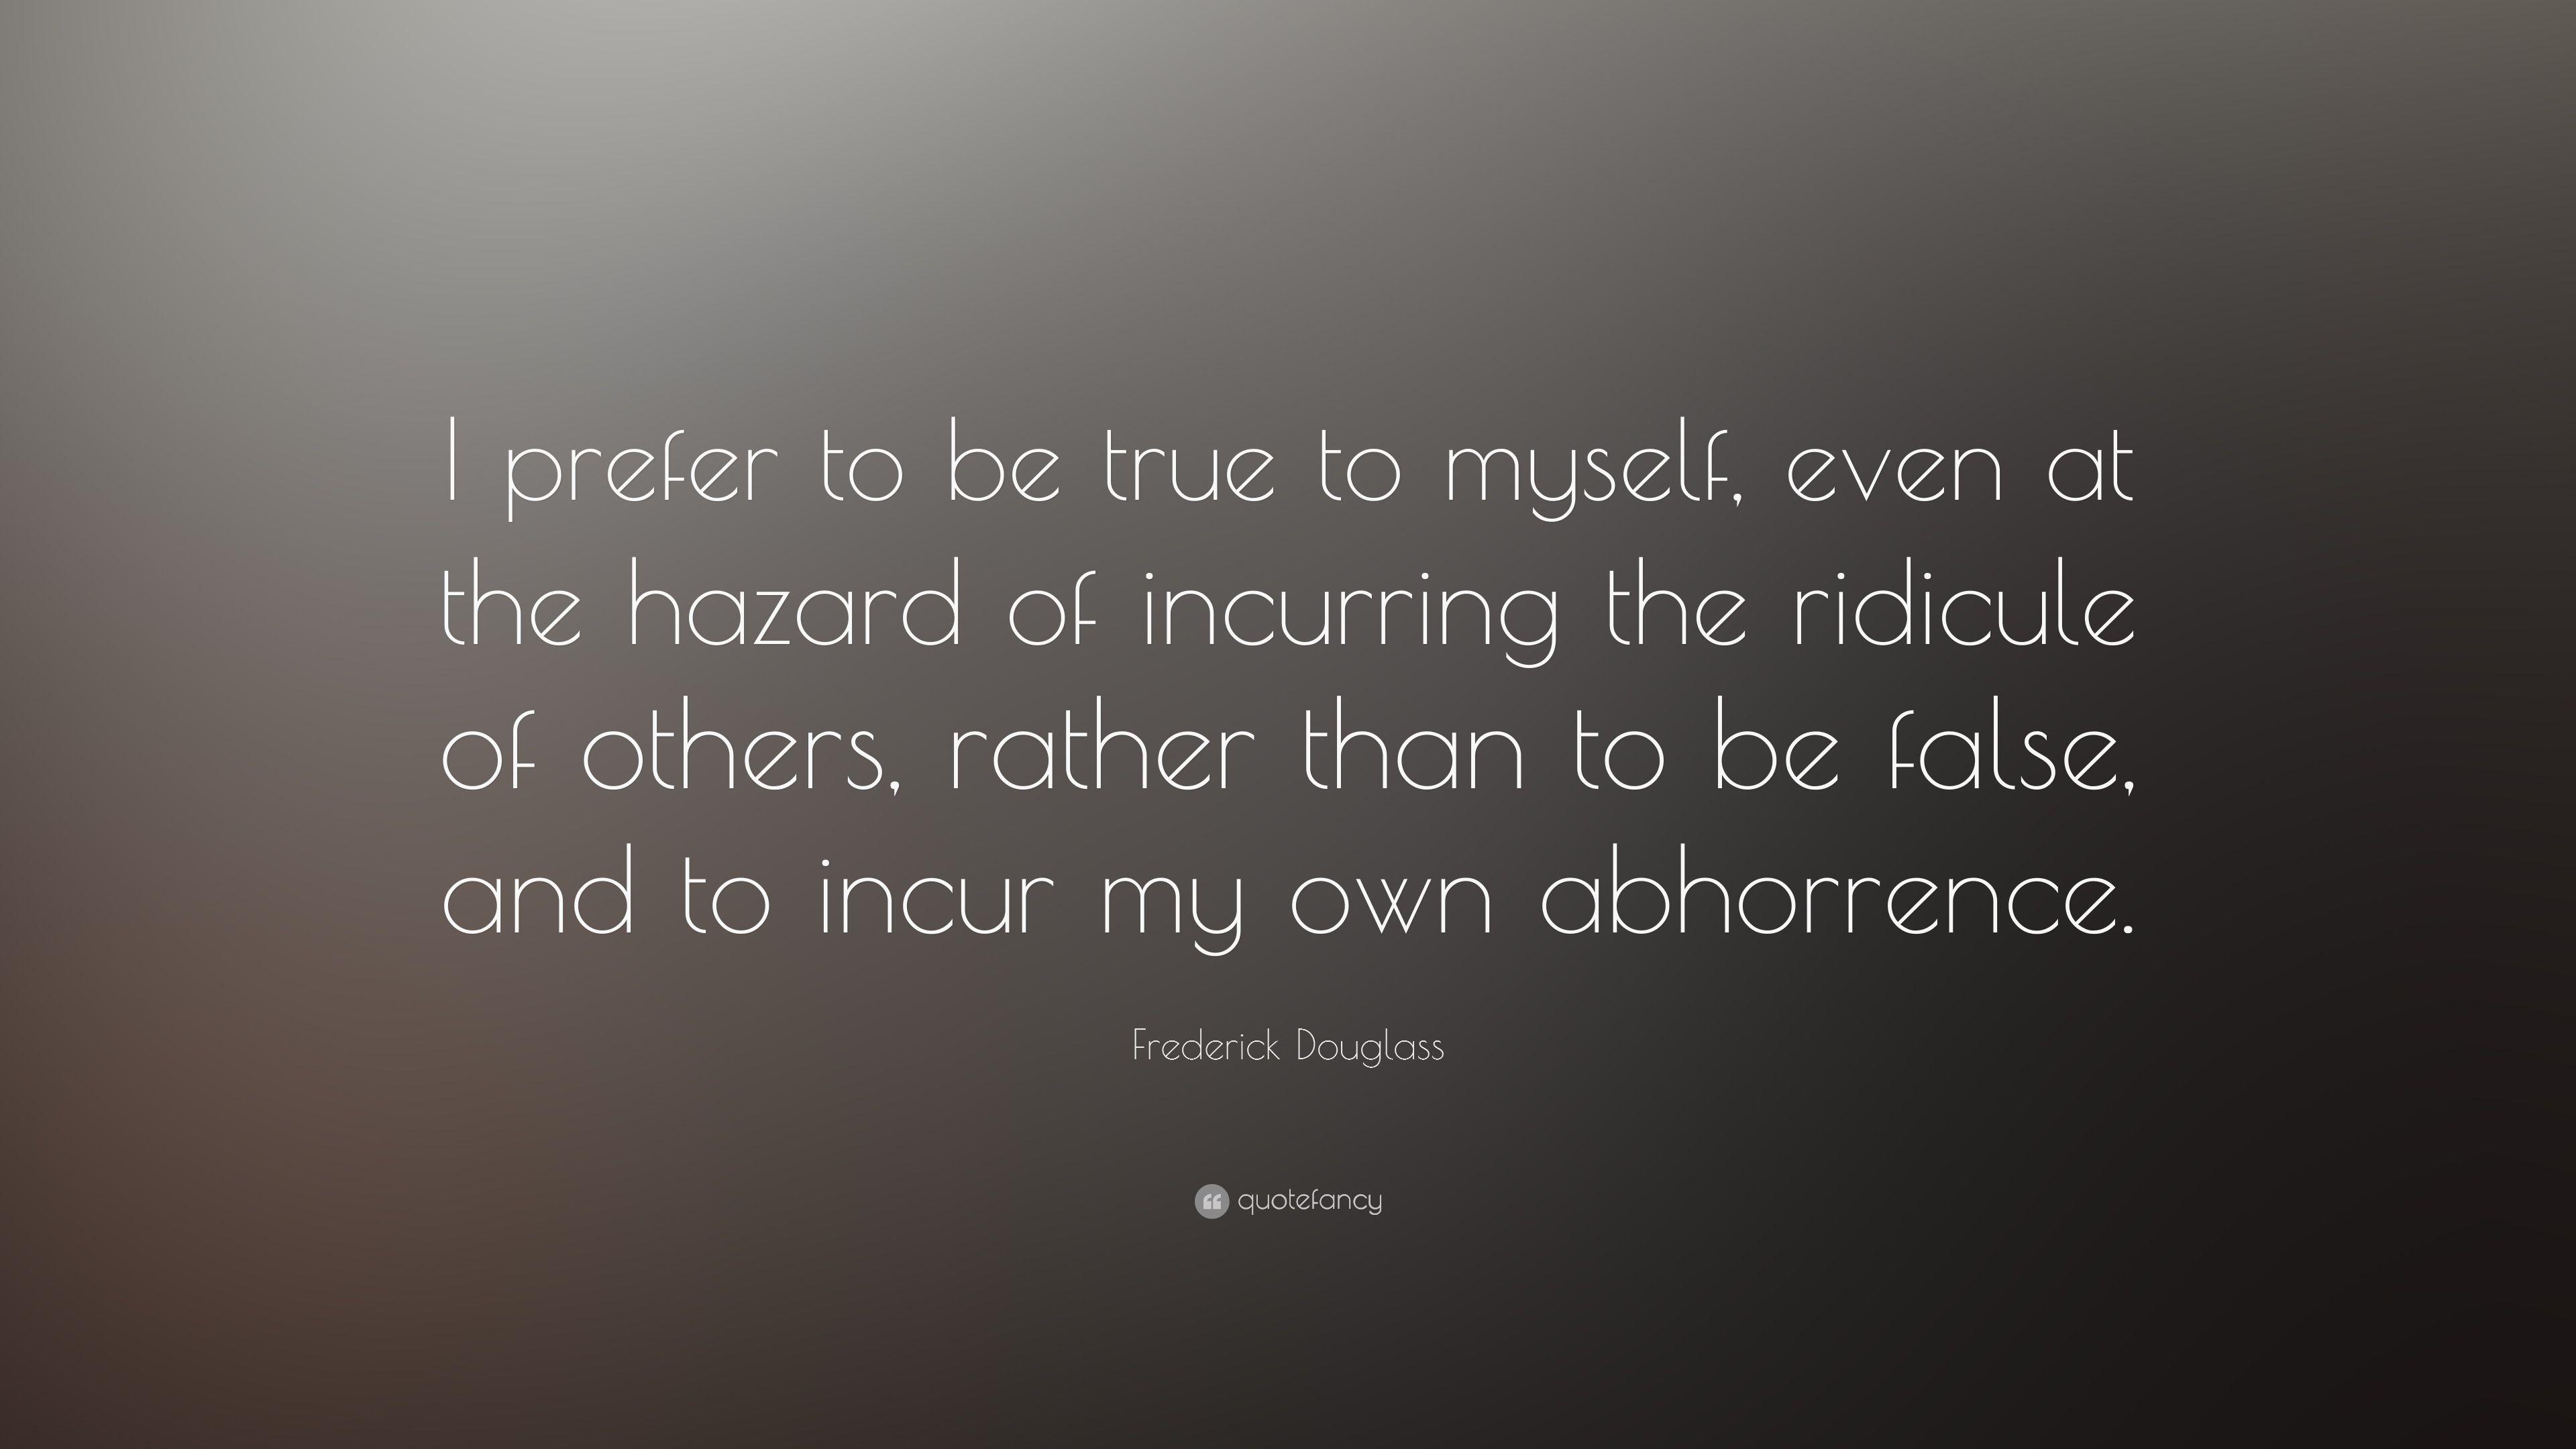 Frederick Douglass Quote: “I prefer to be true to myself, even at